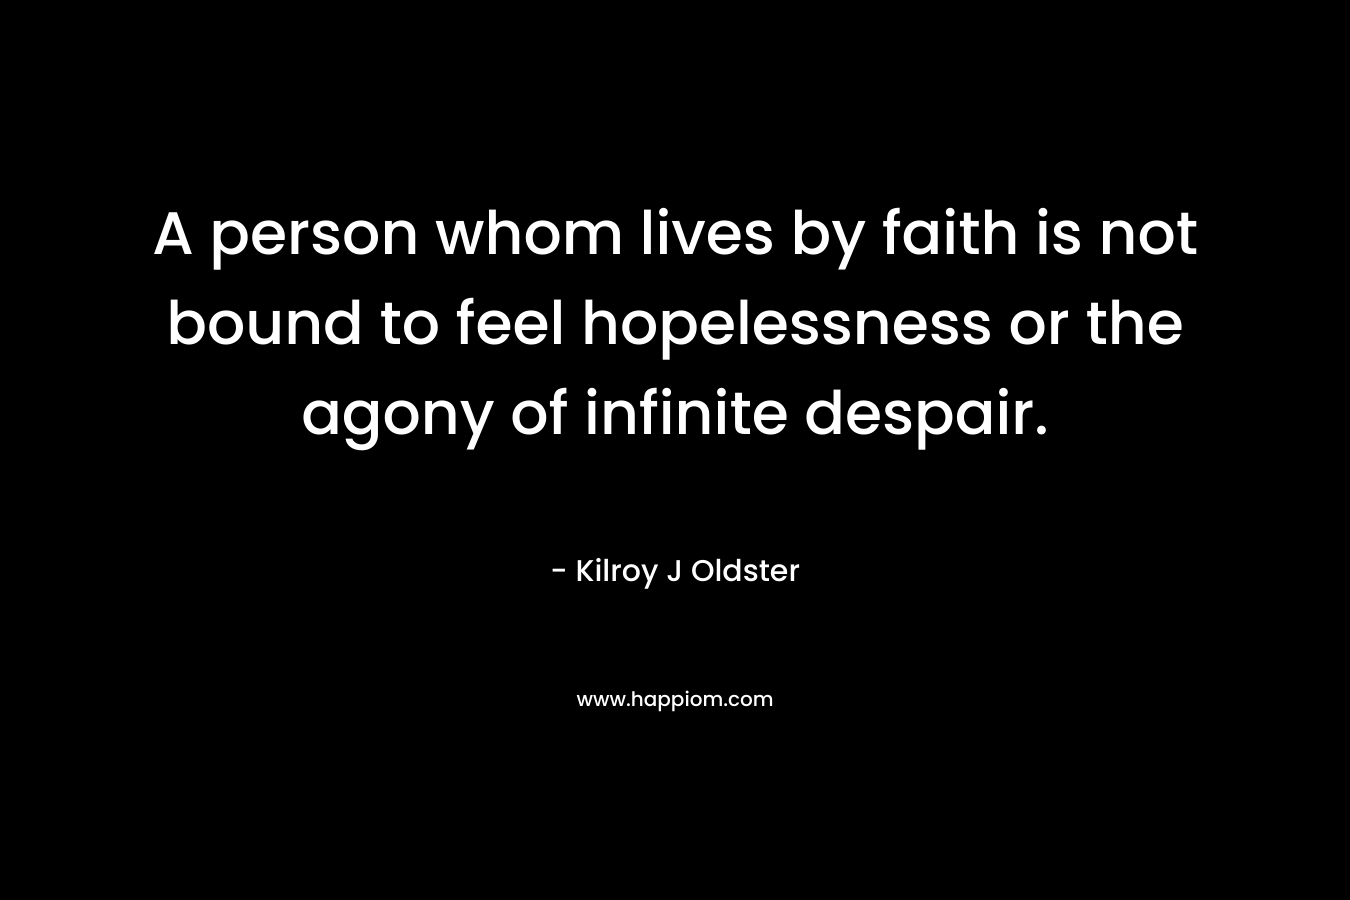 A person whom lives by faith is not bound to feel hopelessness or the agony of infinite despair. – Kilroy J Oldster